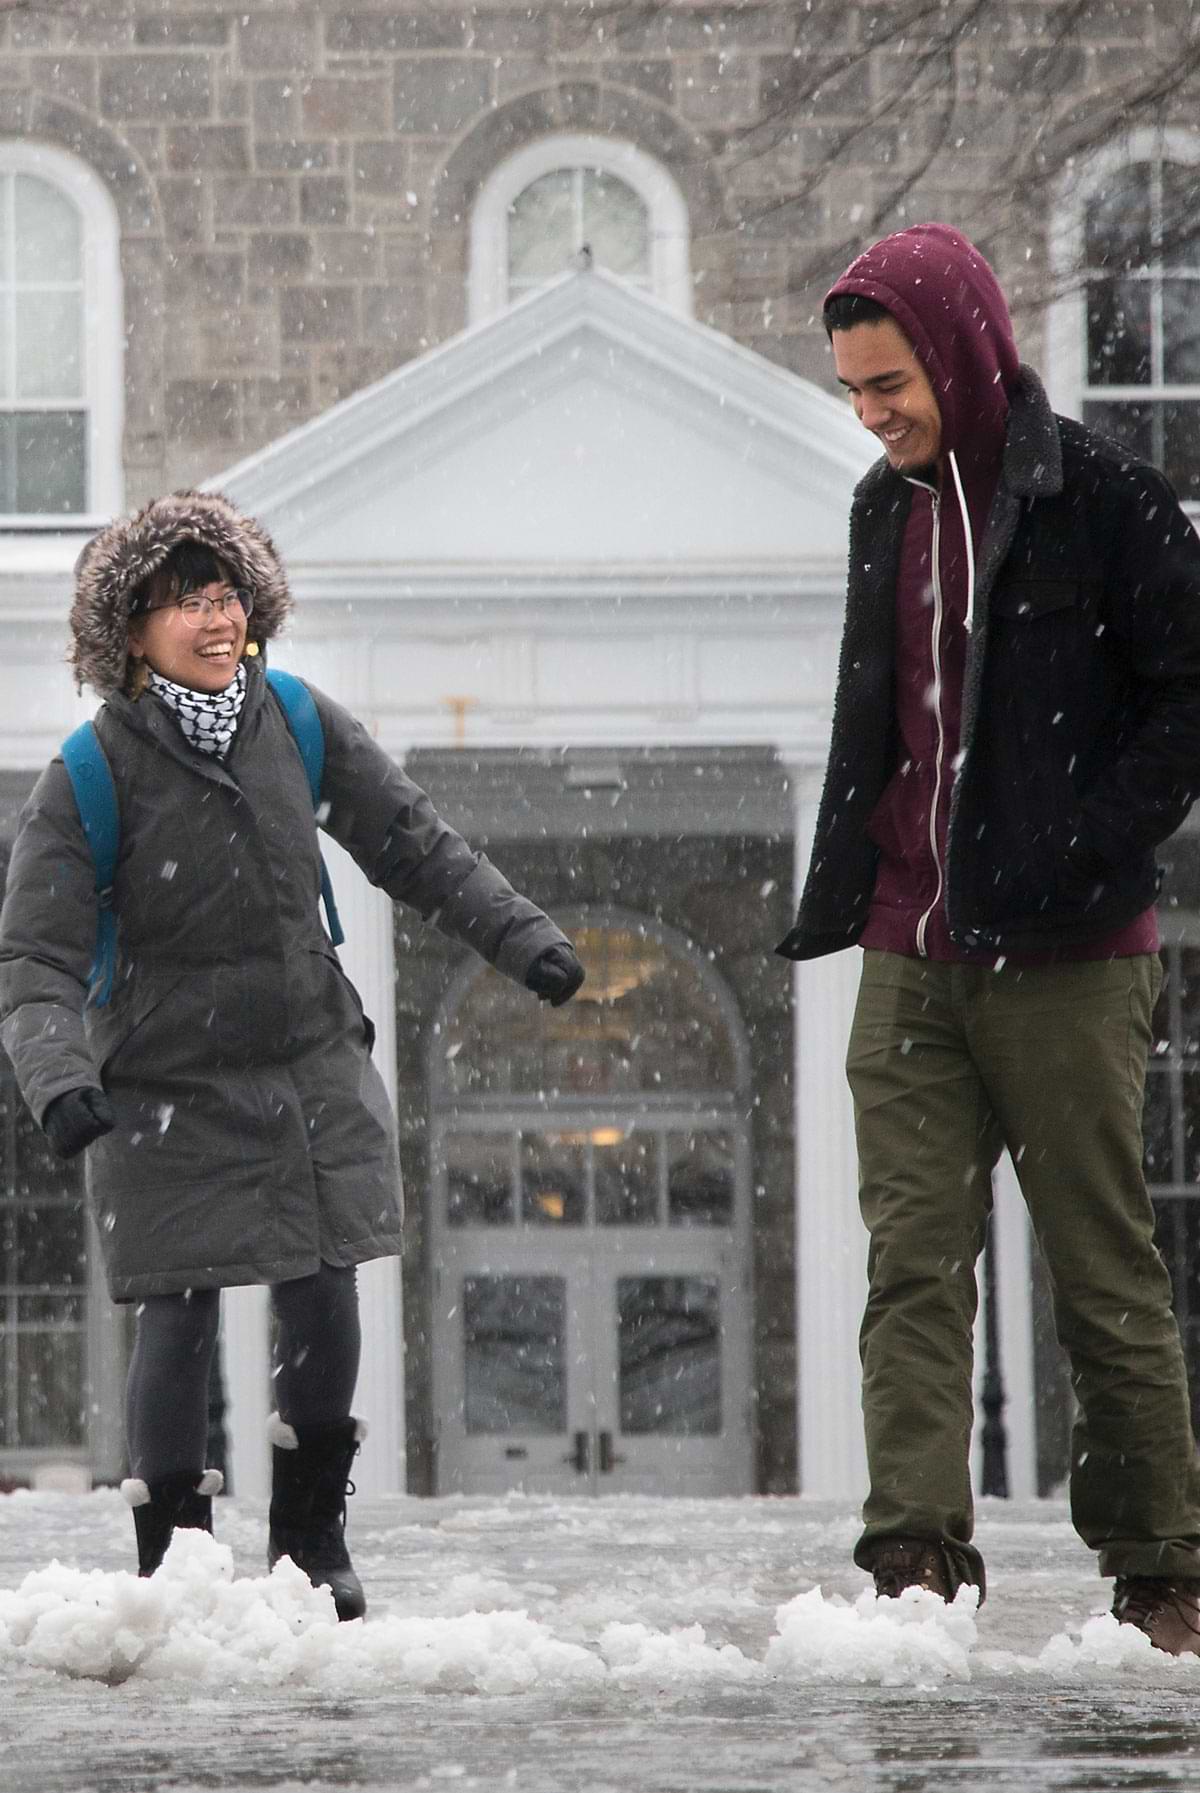 Two people walking in the snow